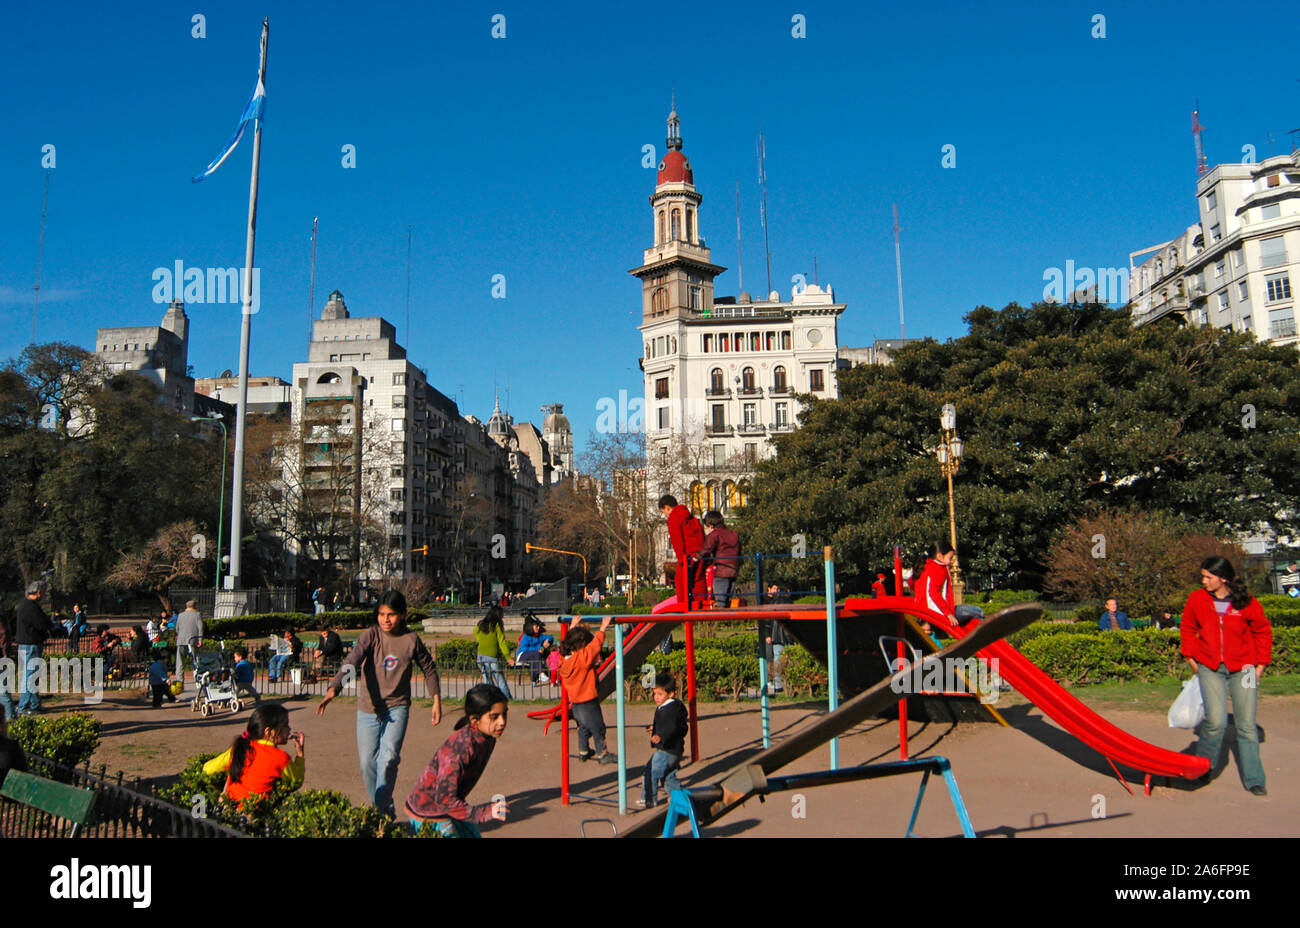 playground for children, Congress square, Buenos Aires, Argentina Stock Photo